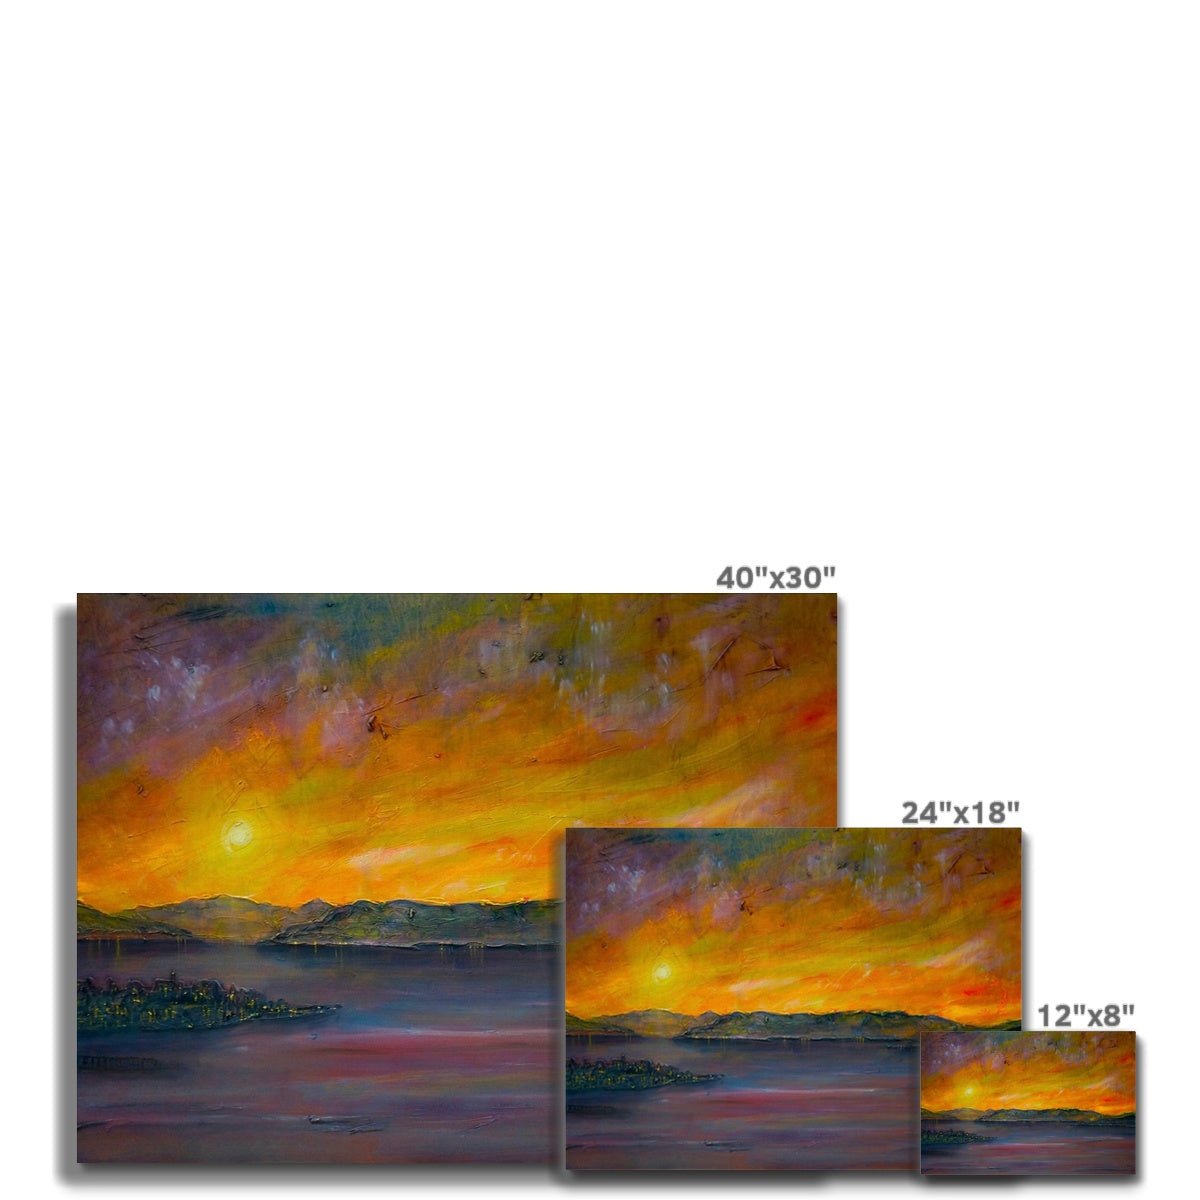 Sunset Over Gourock Painting | Canvas From Scotland-Contemporary Stretched Canvas Prints-River Clyde Art Gallery-Paintings, Prints, Homeware, Art Gifts From Scotland By Scottish Artist Kevin Hunter